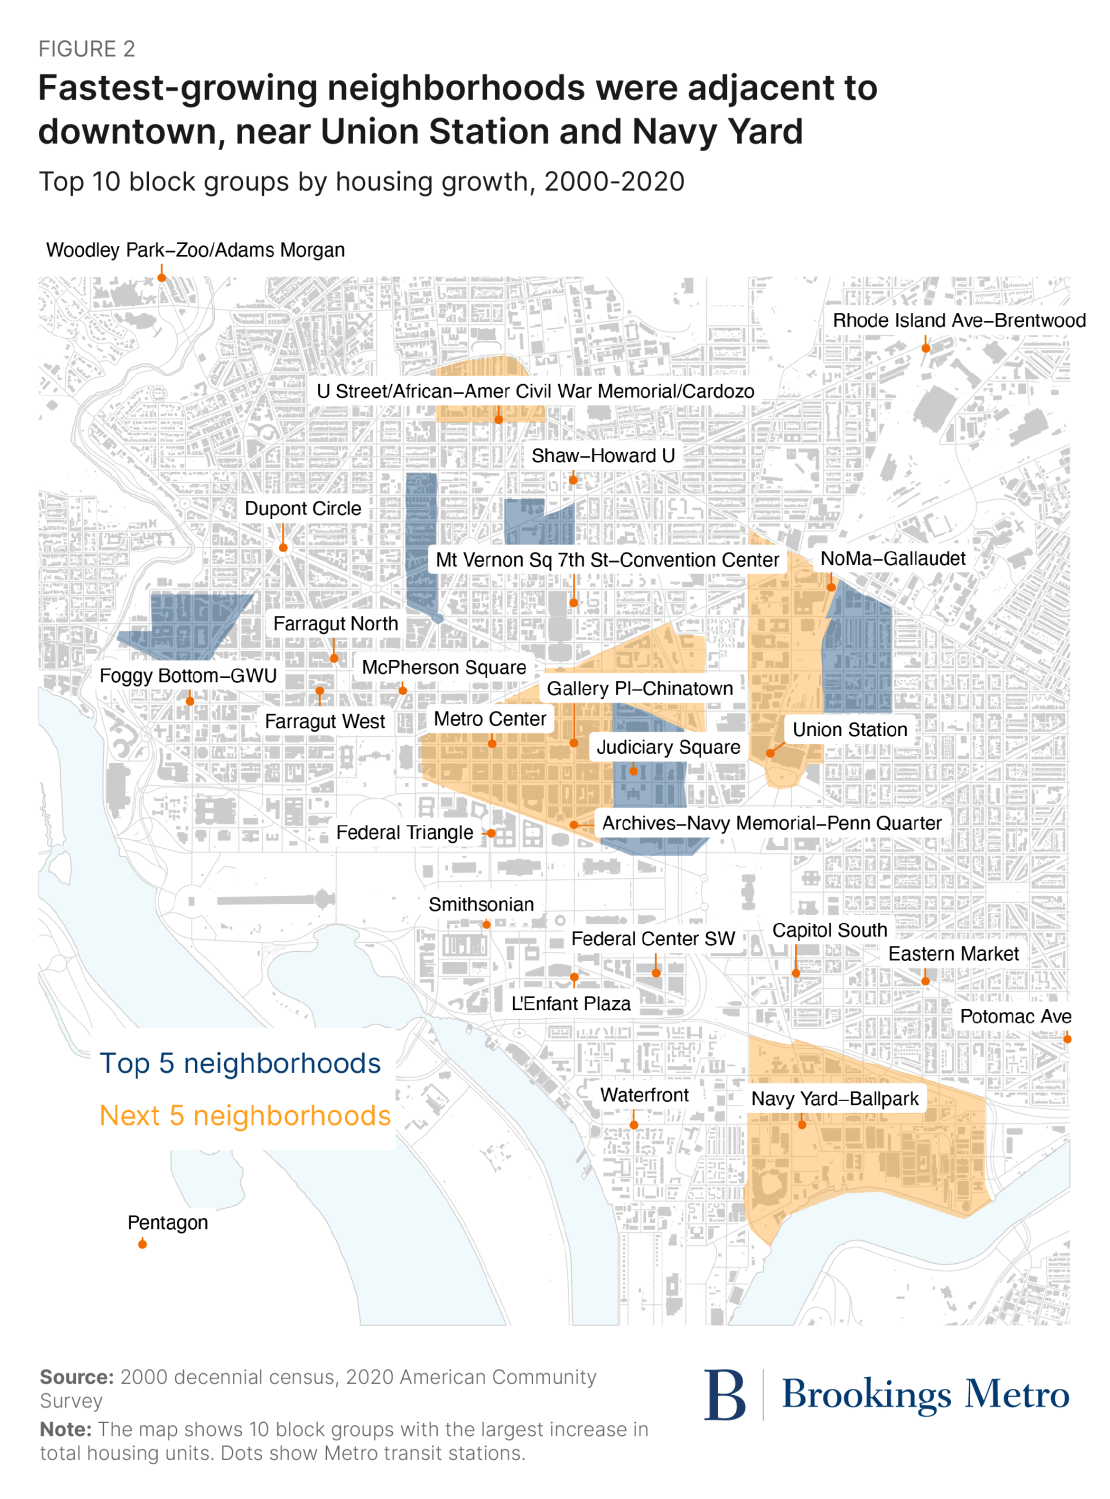 Figure 2. Fastest-growing neighborhoods were adjacent to downtown, near Union Station and Navy Yard